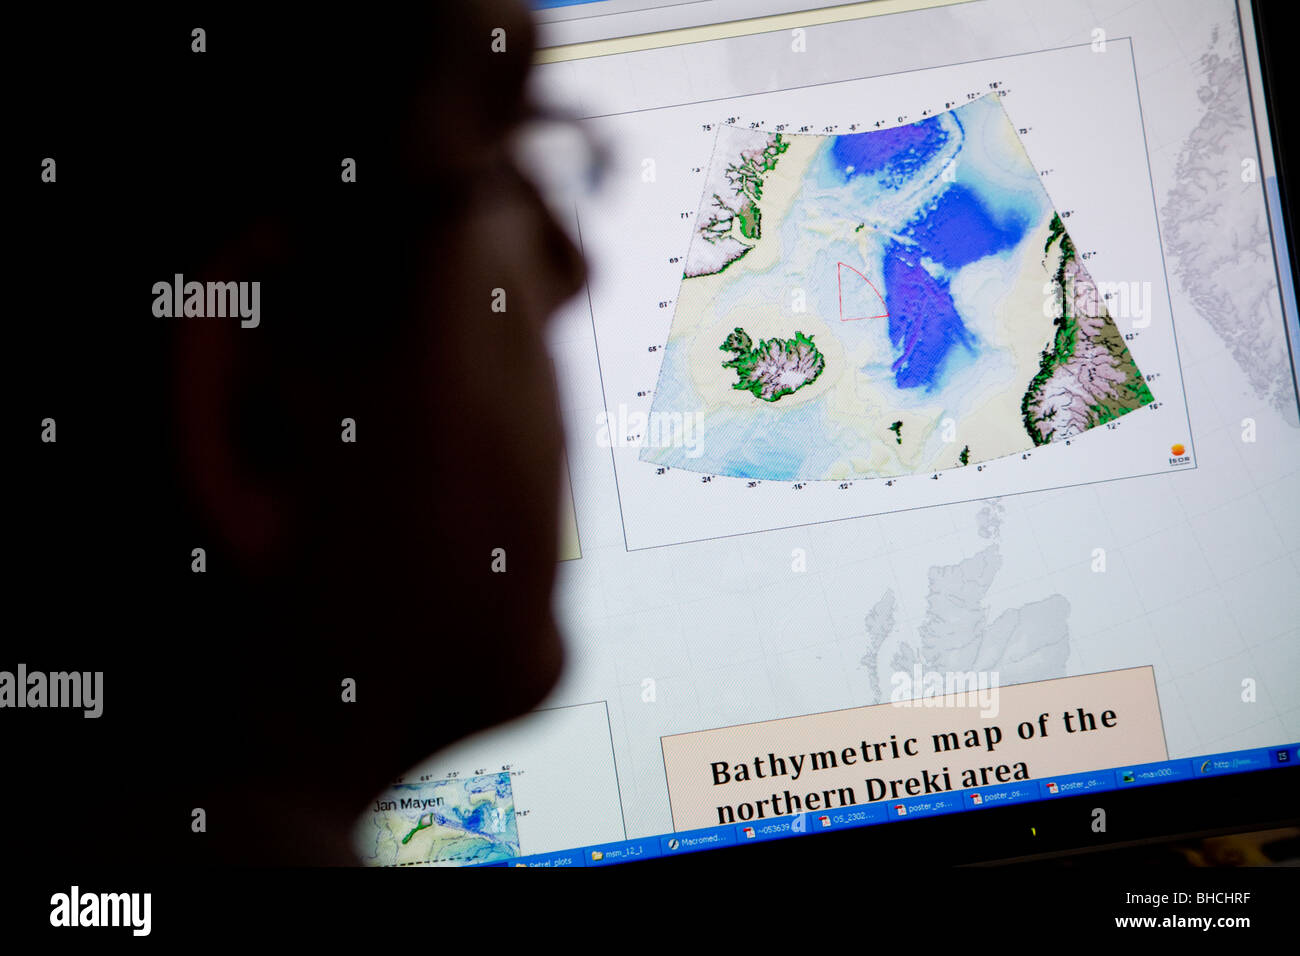 Thorarinn S. Arnarson, Oceanographer and Hydrocarbon Licensing Manager, shows a map of the Dreki area. NEA in Reykjavik, Iceland Stock Photo